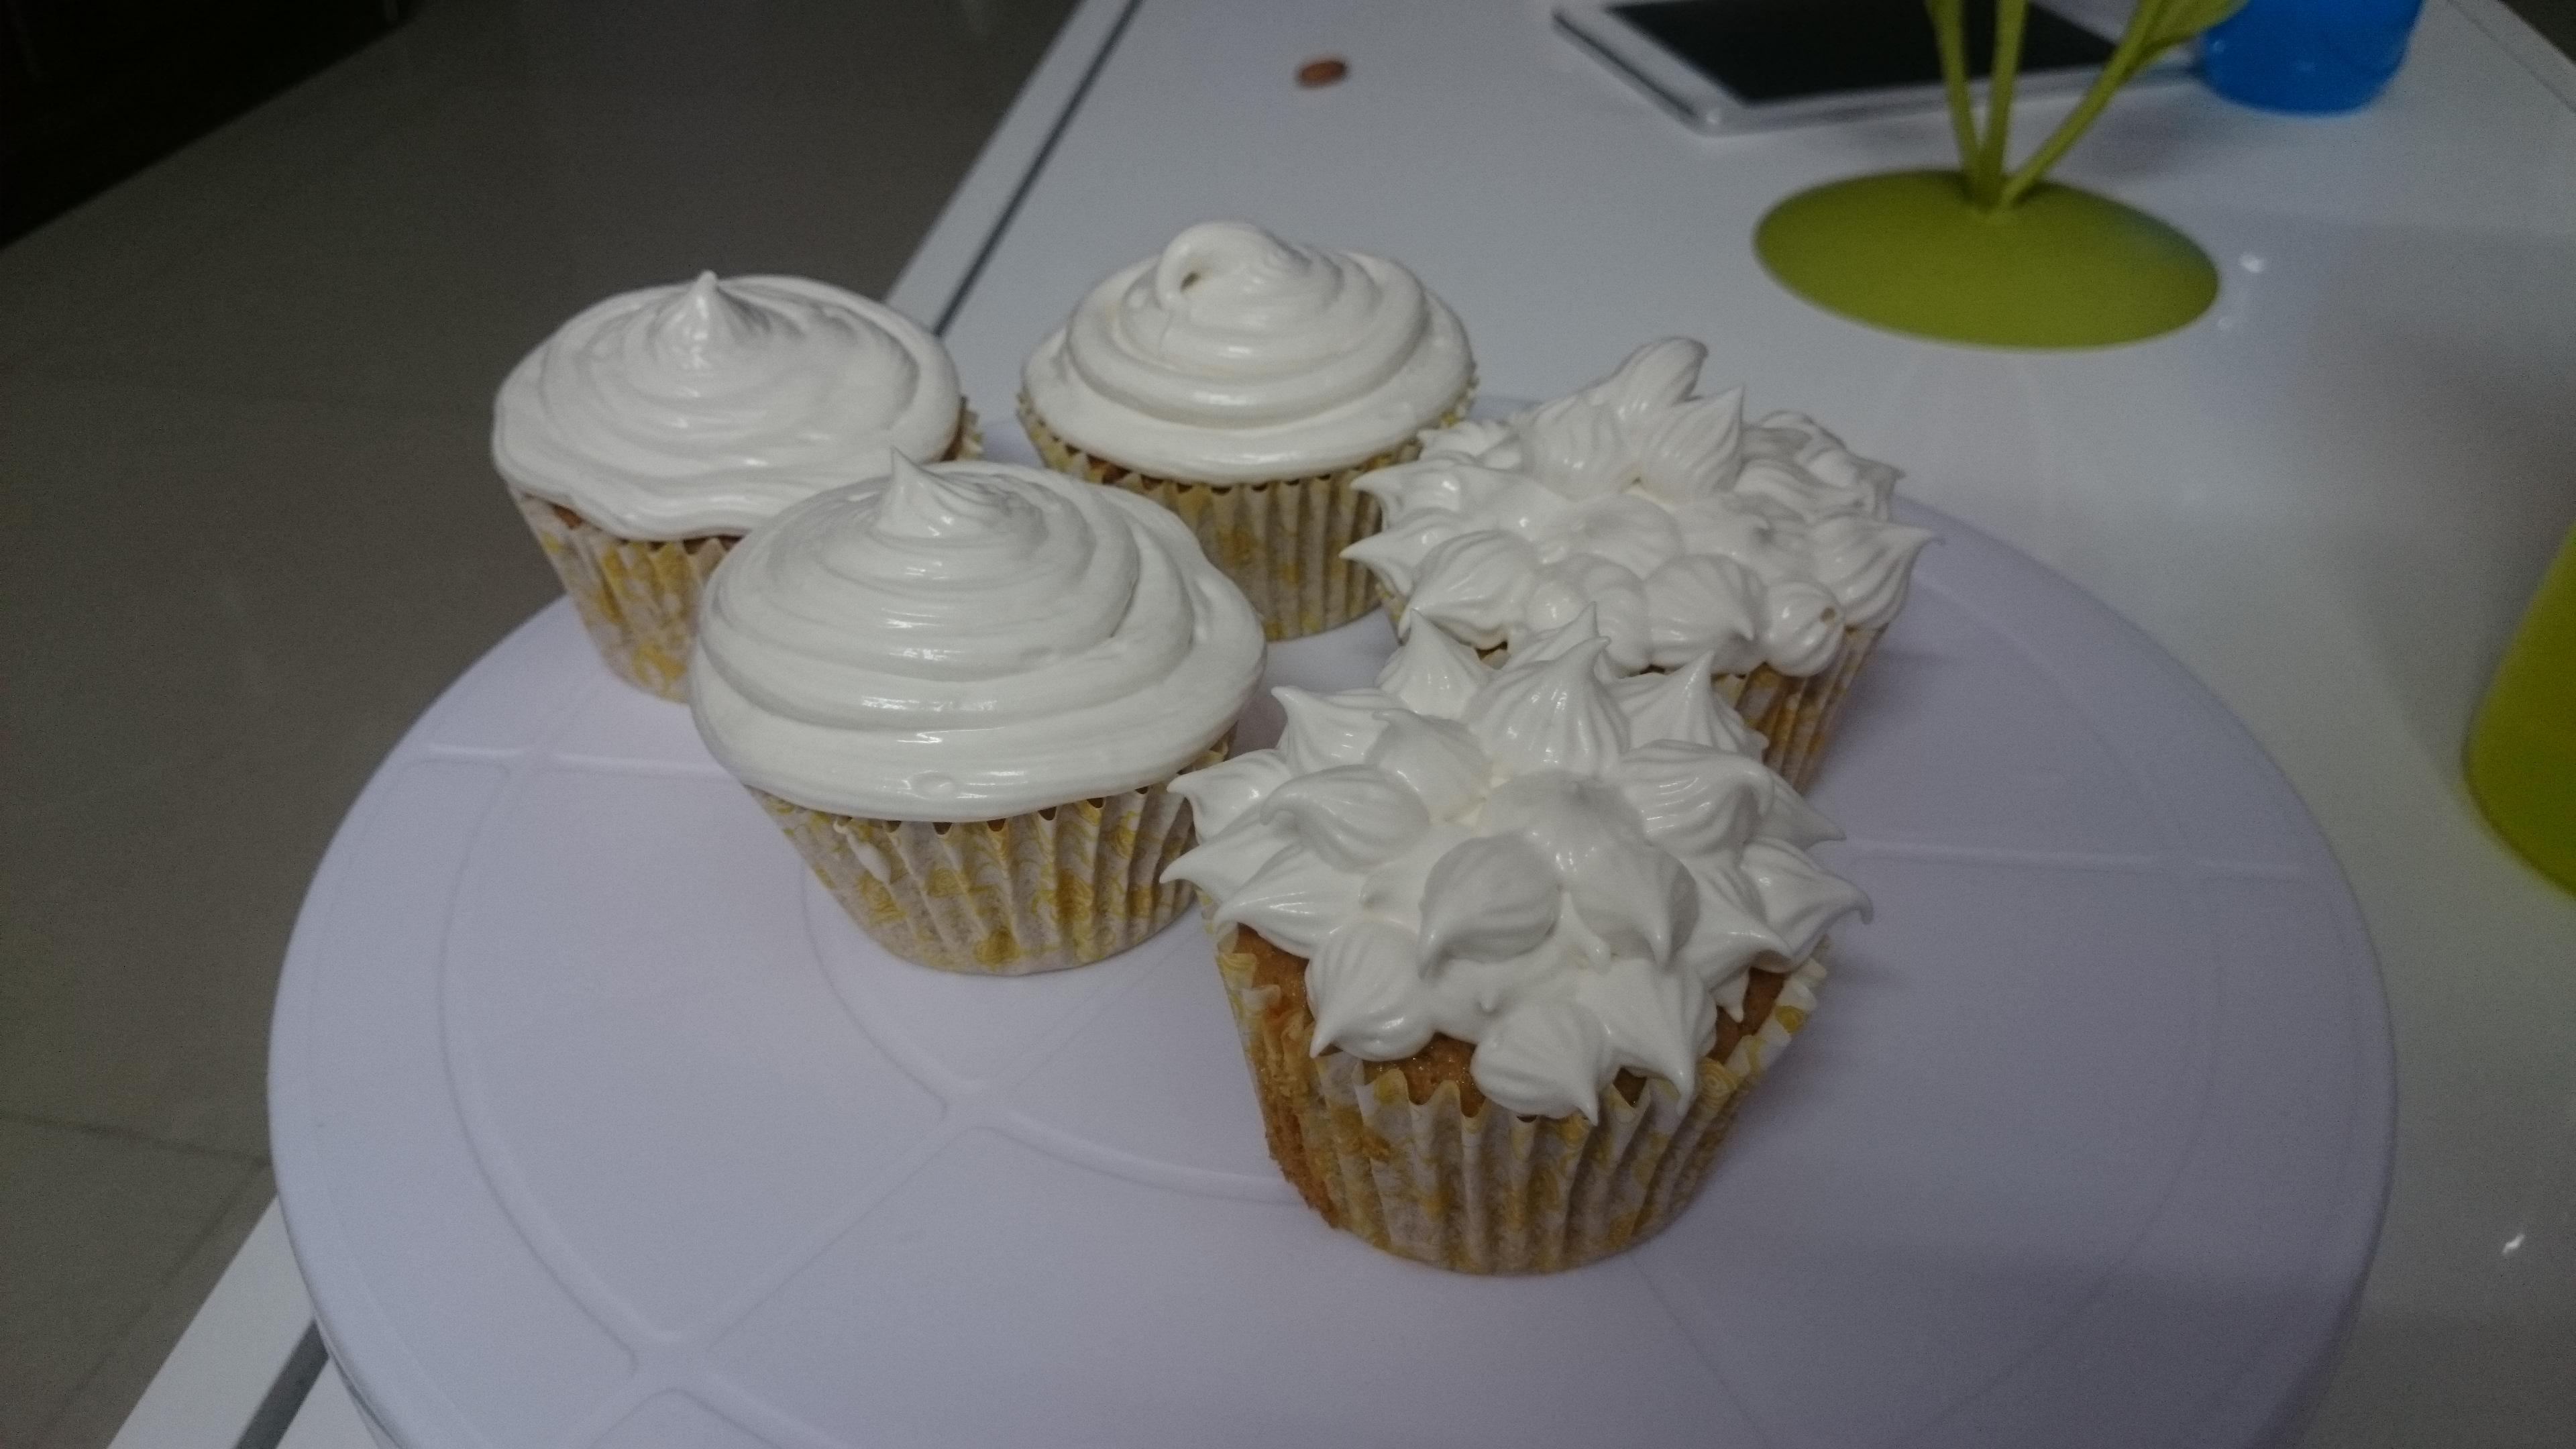 Carrot cupcakes with Cream cheese frosting